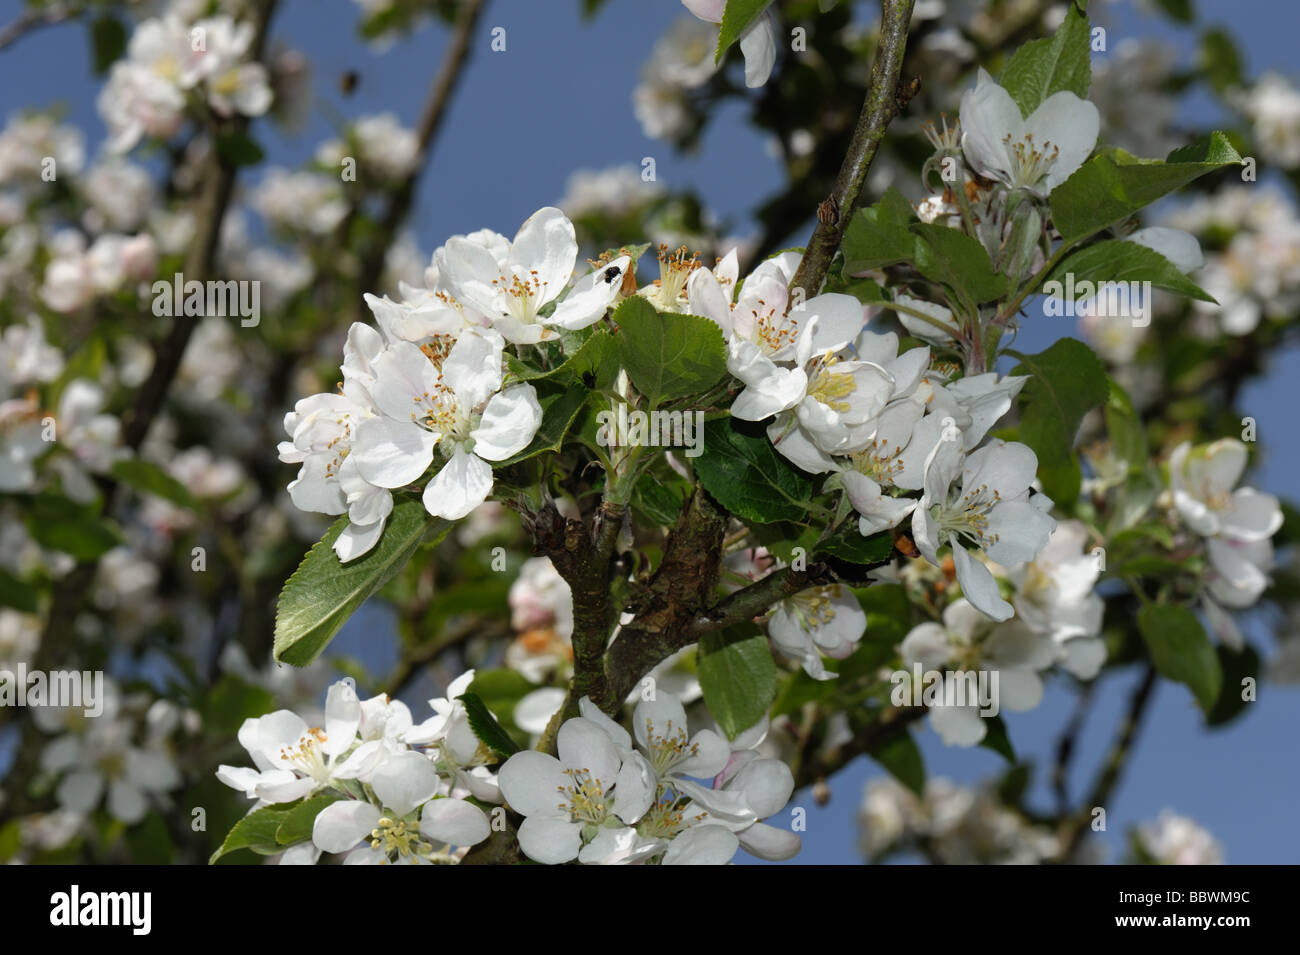 Blossom on a Discovery apple in spring Stock Photo